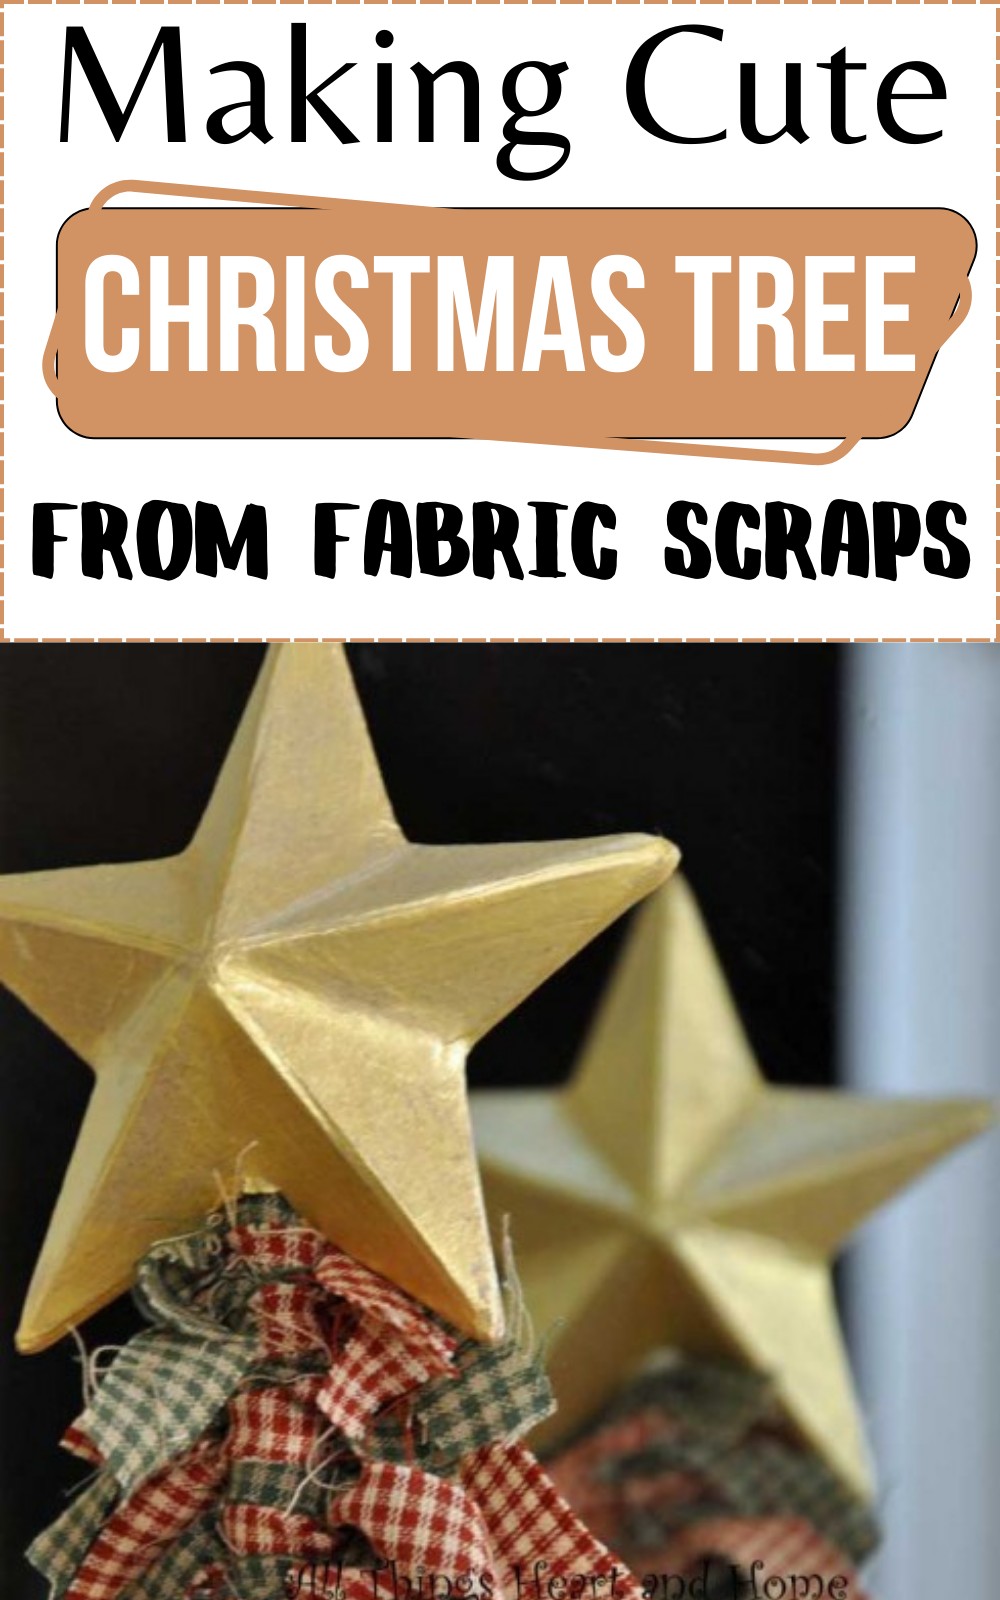 Making Cute Christmas Tree From Fabric Scraps